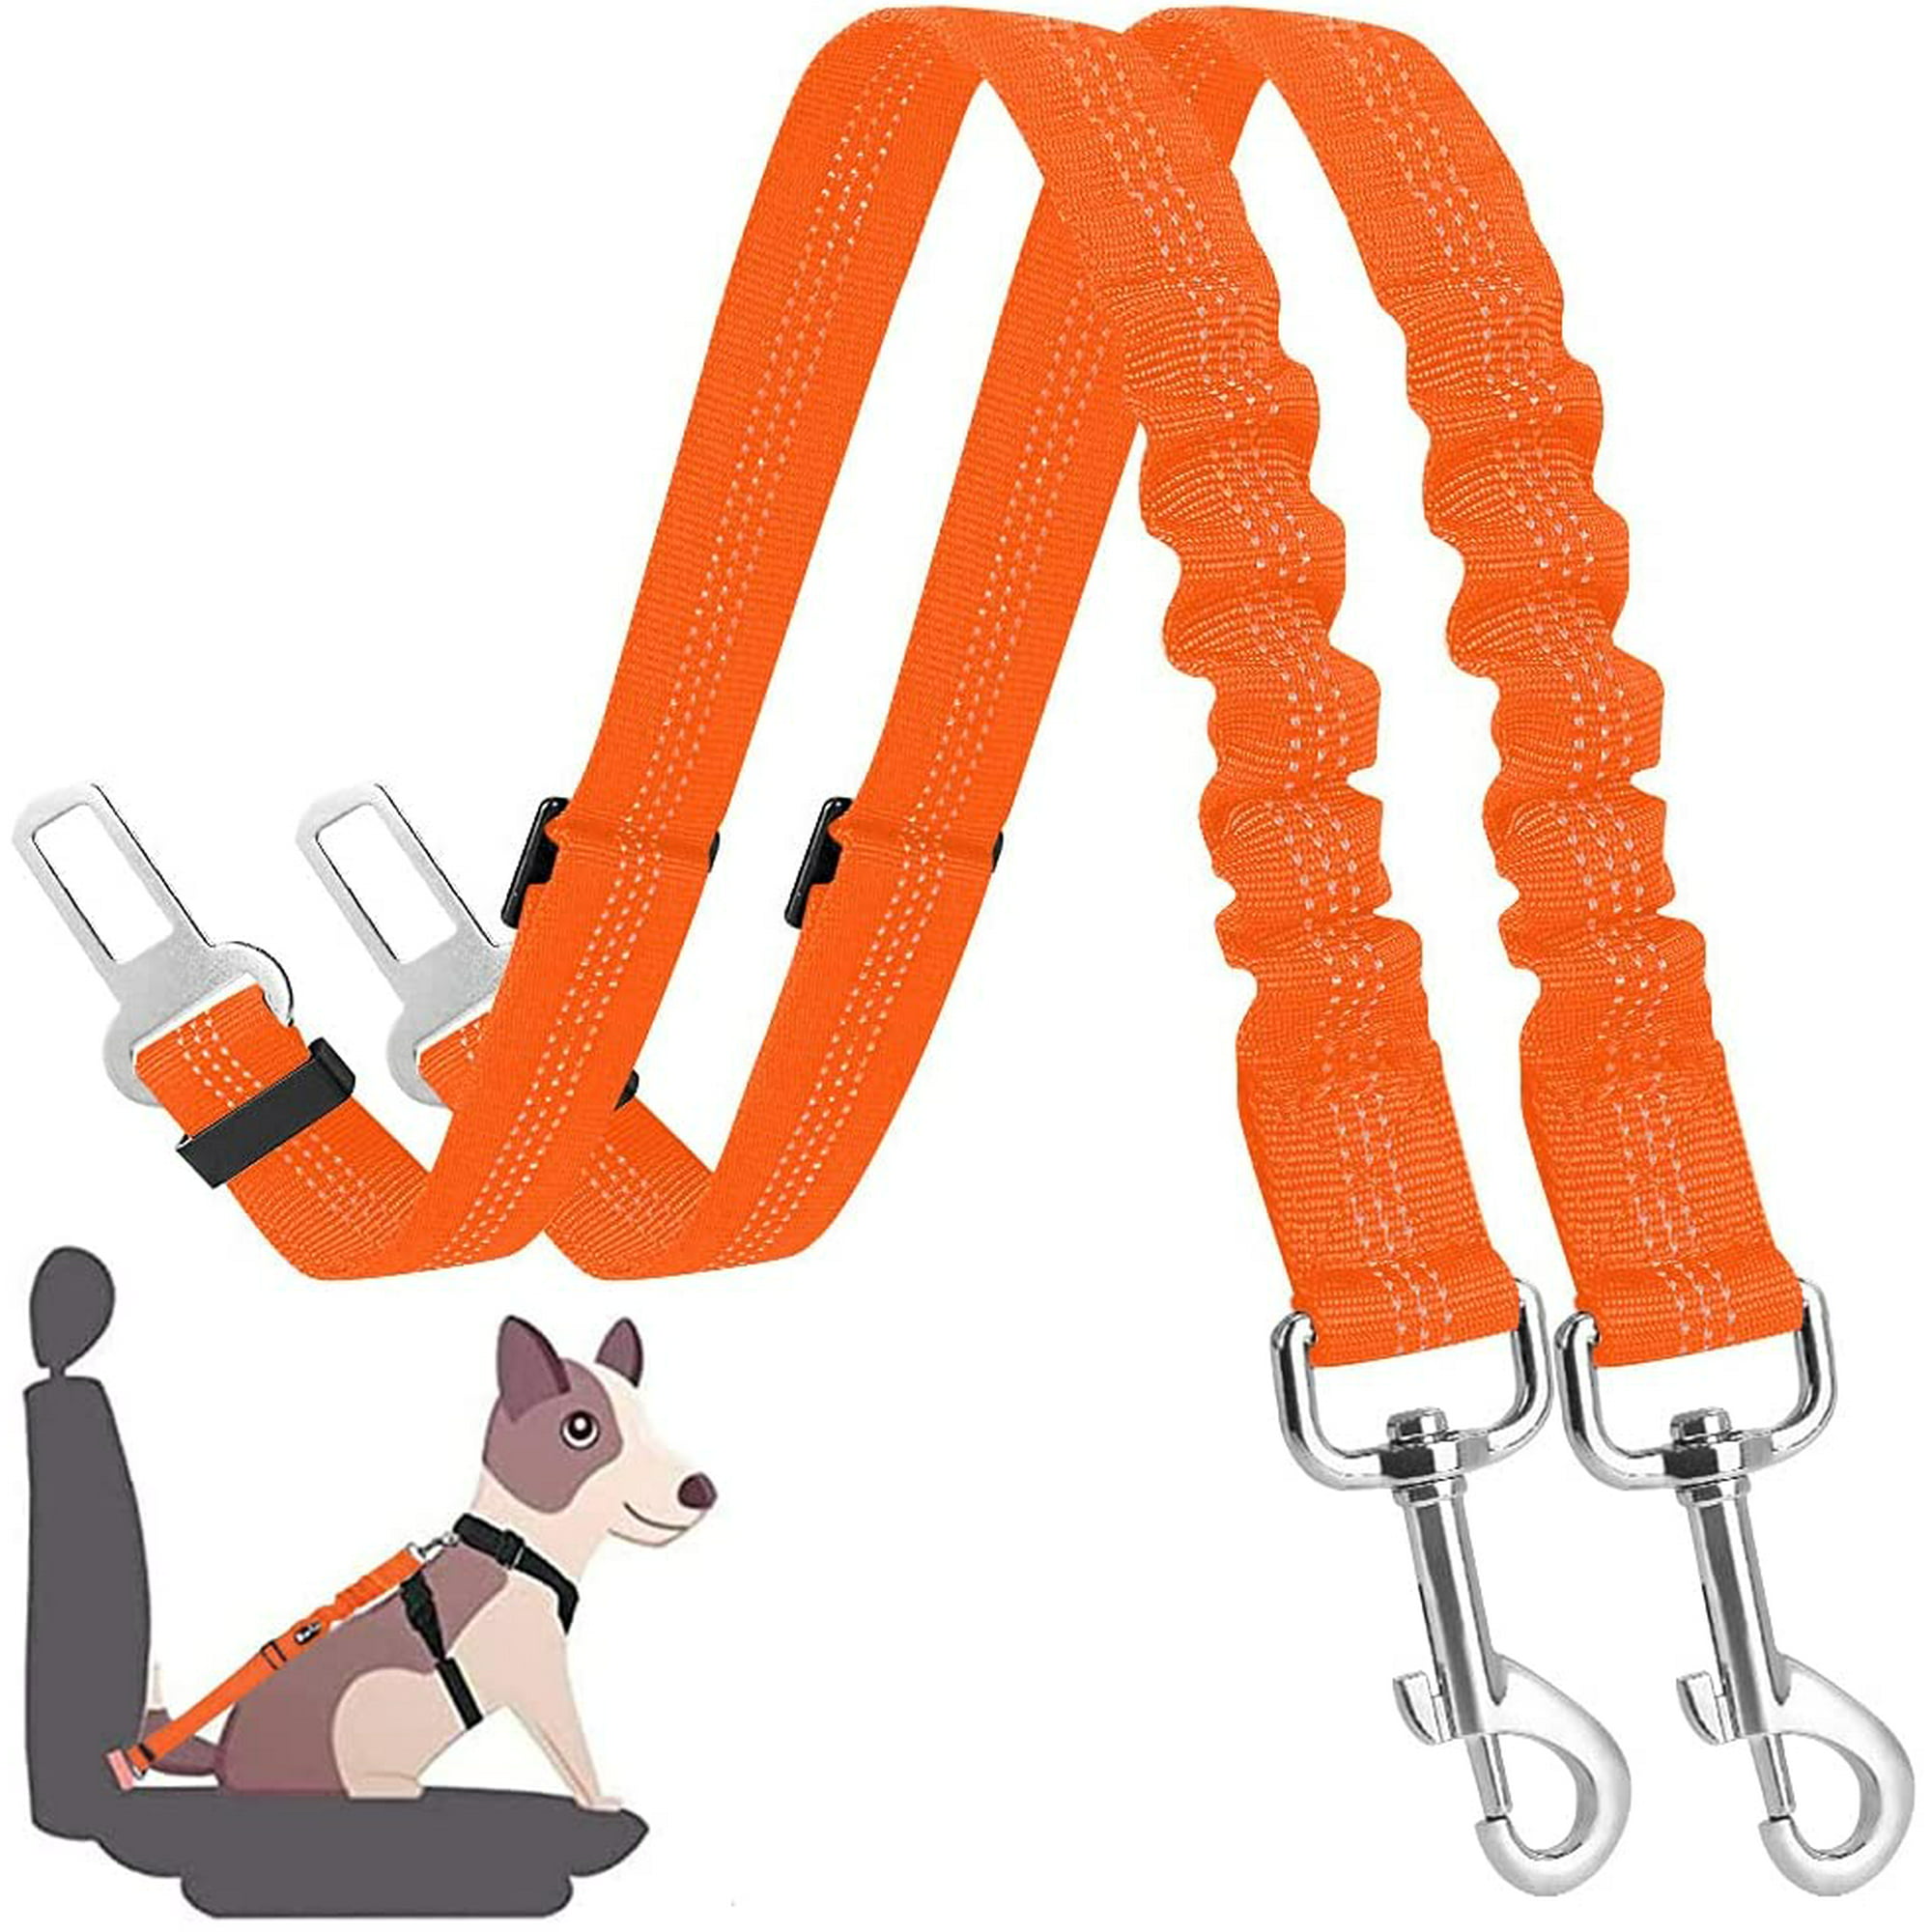  SlowTon Dog Seatbelt, 2 Pack Dog Seat Belt Car Leash  Adjustable Elastic Bungee Buffer Heavy Duty Nylon Reflective Pet Safety  Tether Connect to Dog Harness for Travel Riding in Vehicle (